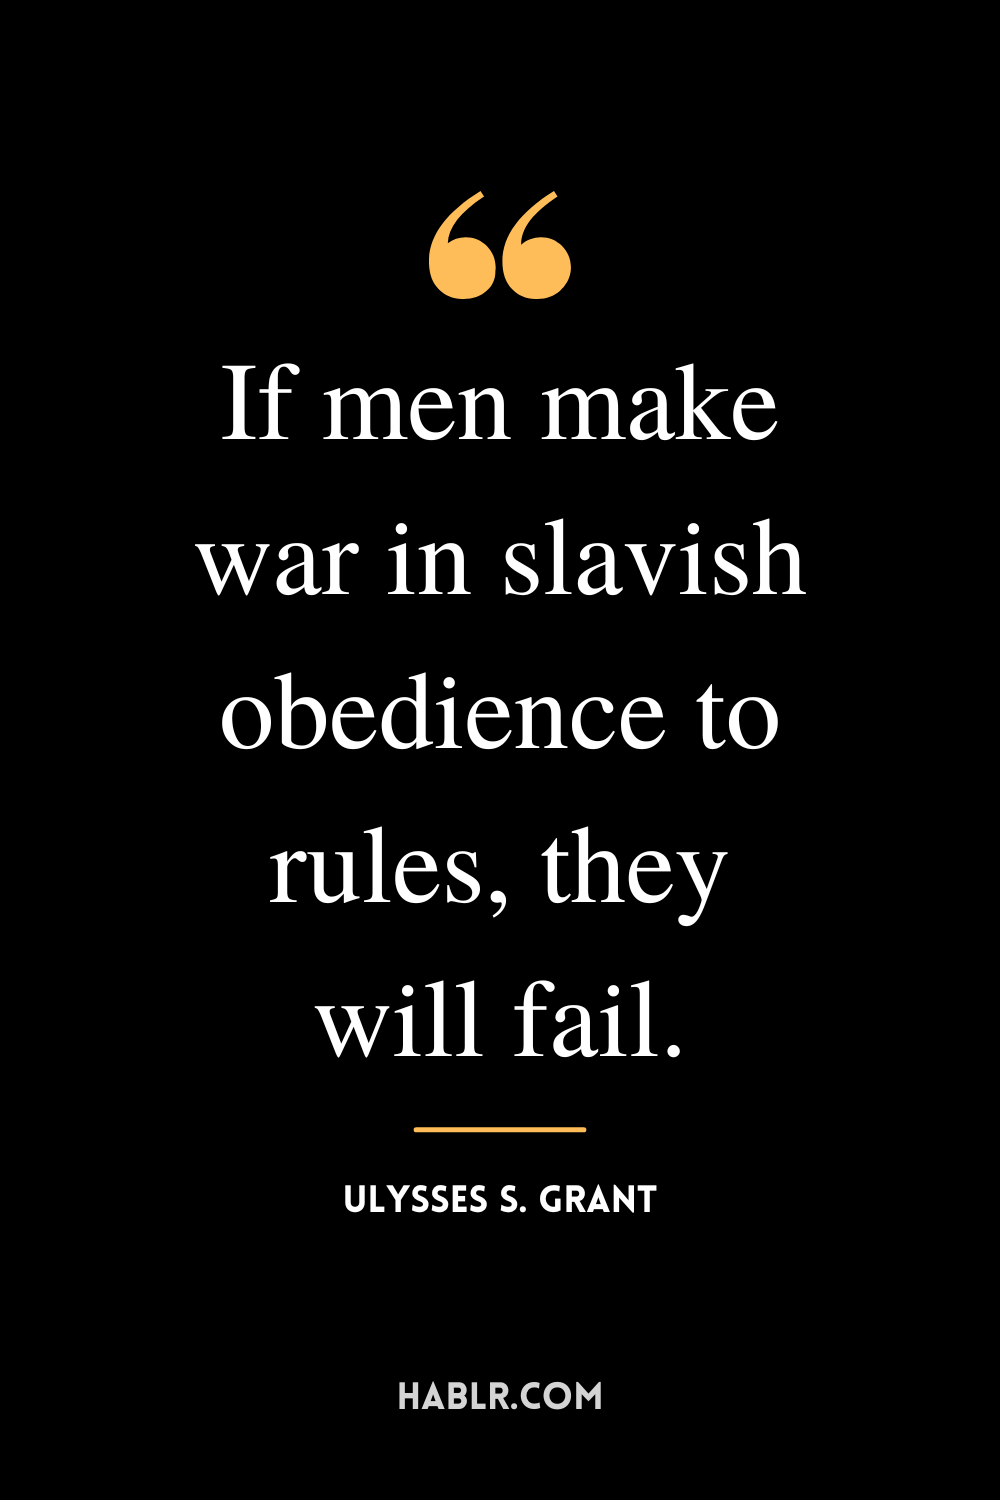 “If men make war in slavish obedience to rules, they will fail.” -Ulysses S. Grant